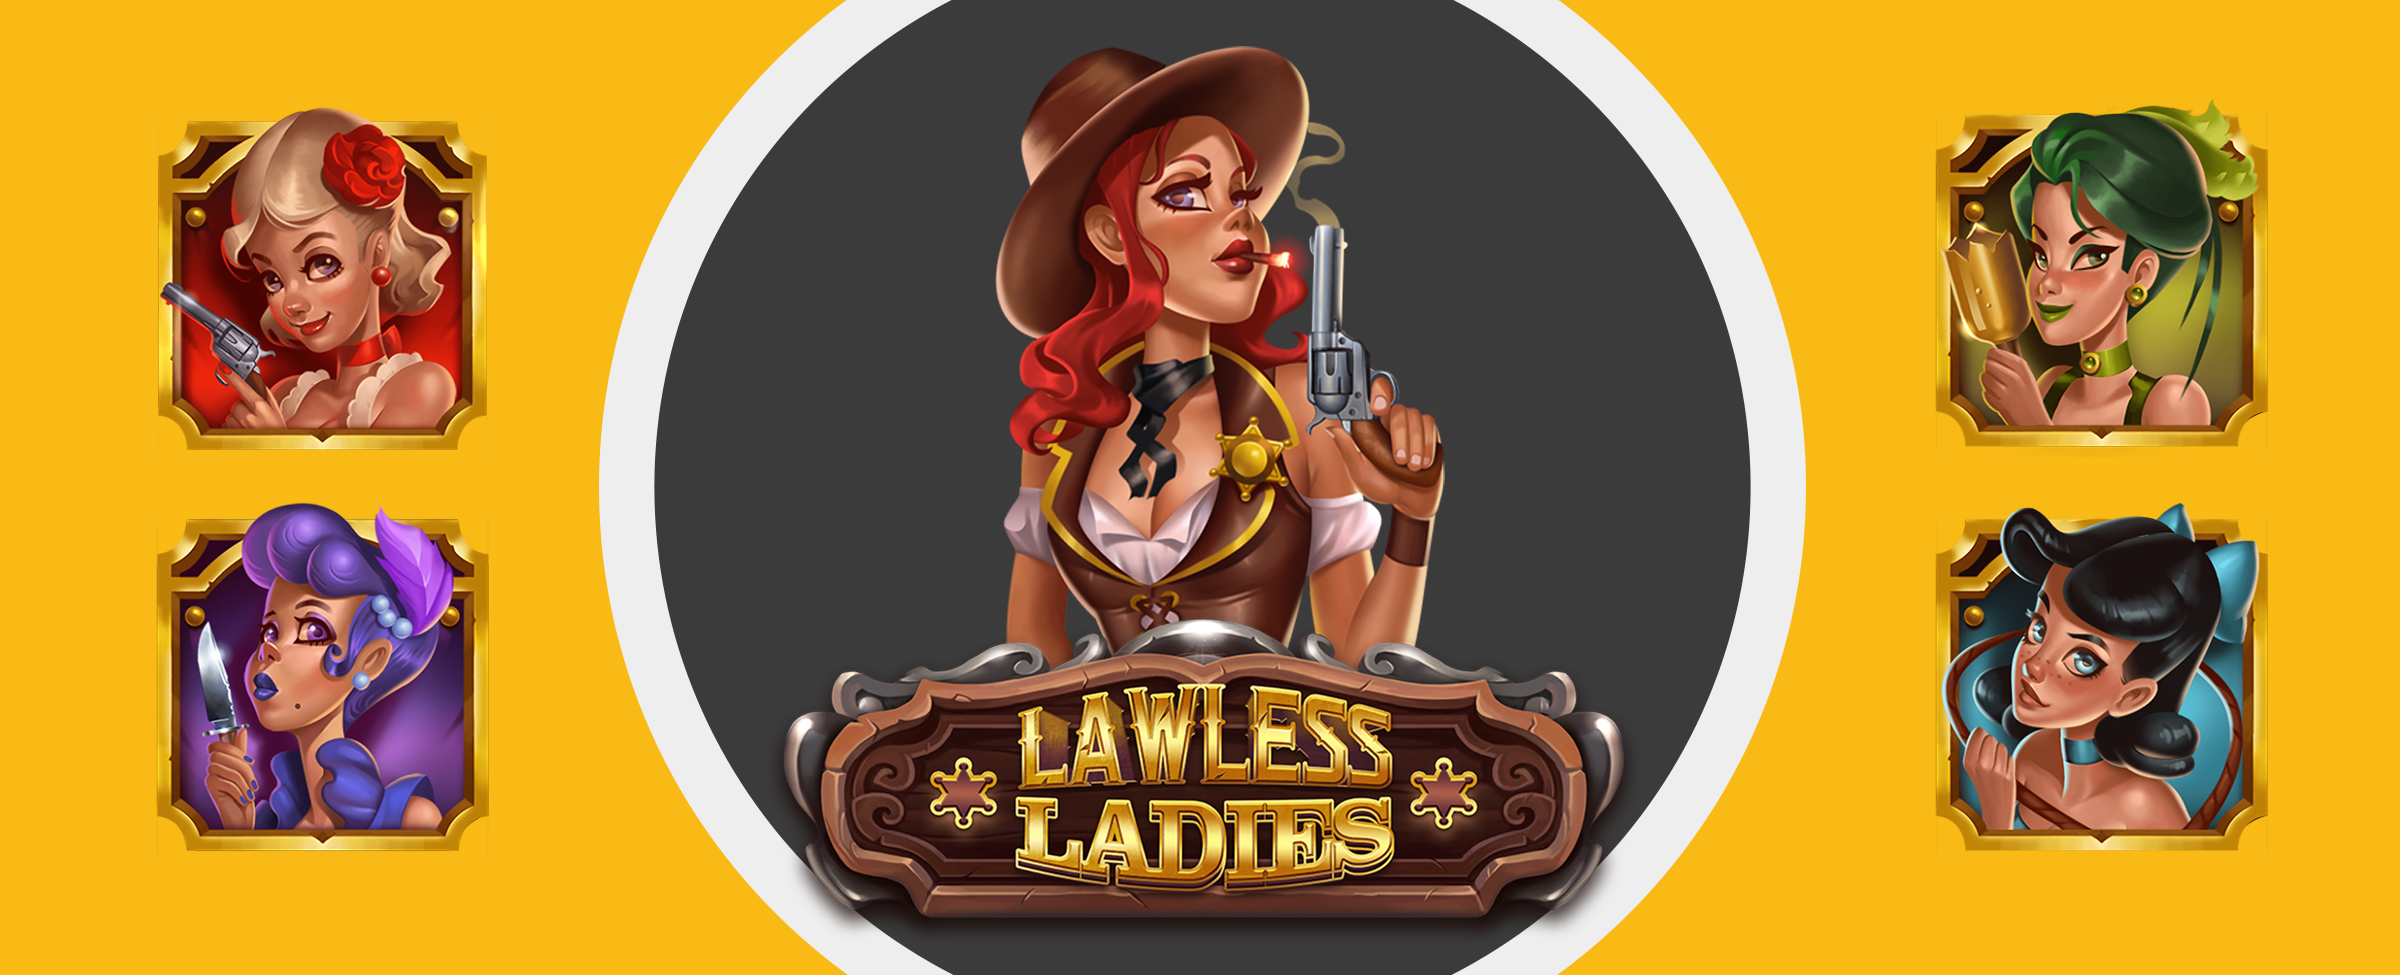 Alright you lawless lot! Here’s a special one for those with a penchant for mischief: Lawless Ladies. Watch out for the pesky sheriff, and keep an eye on that jackpot because it could go off at any time!